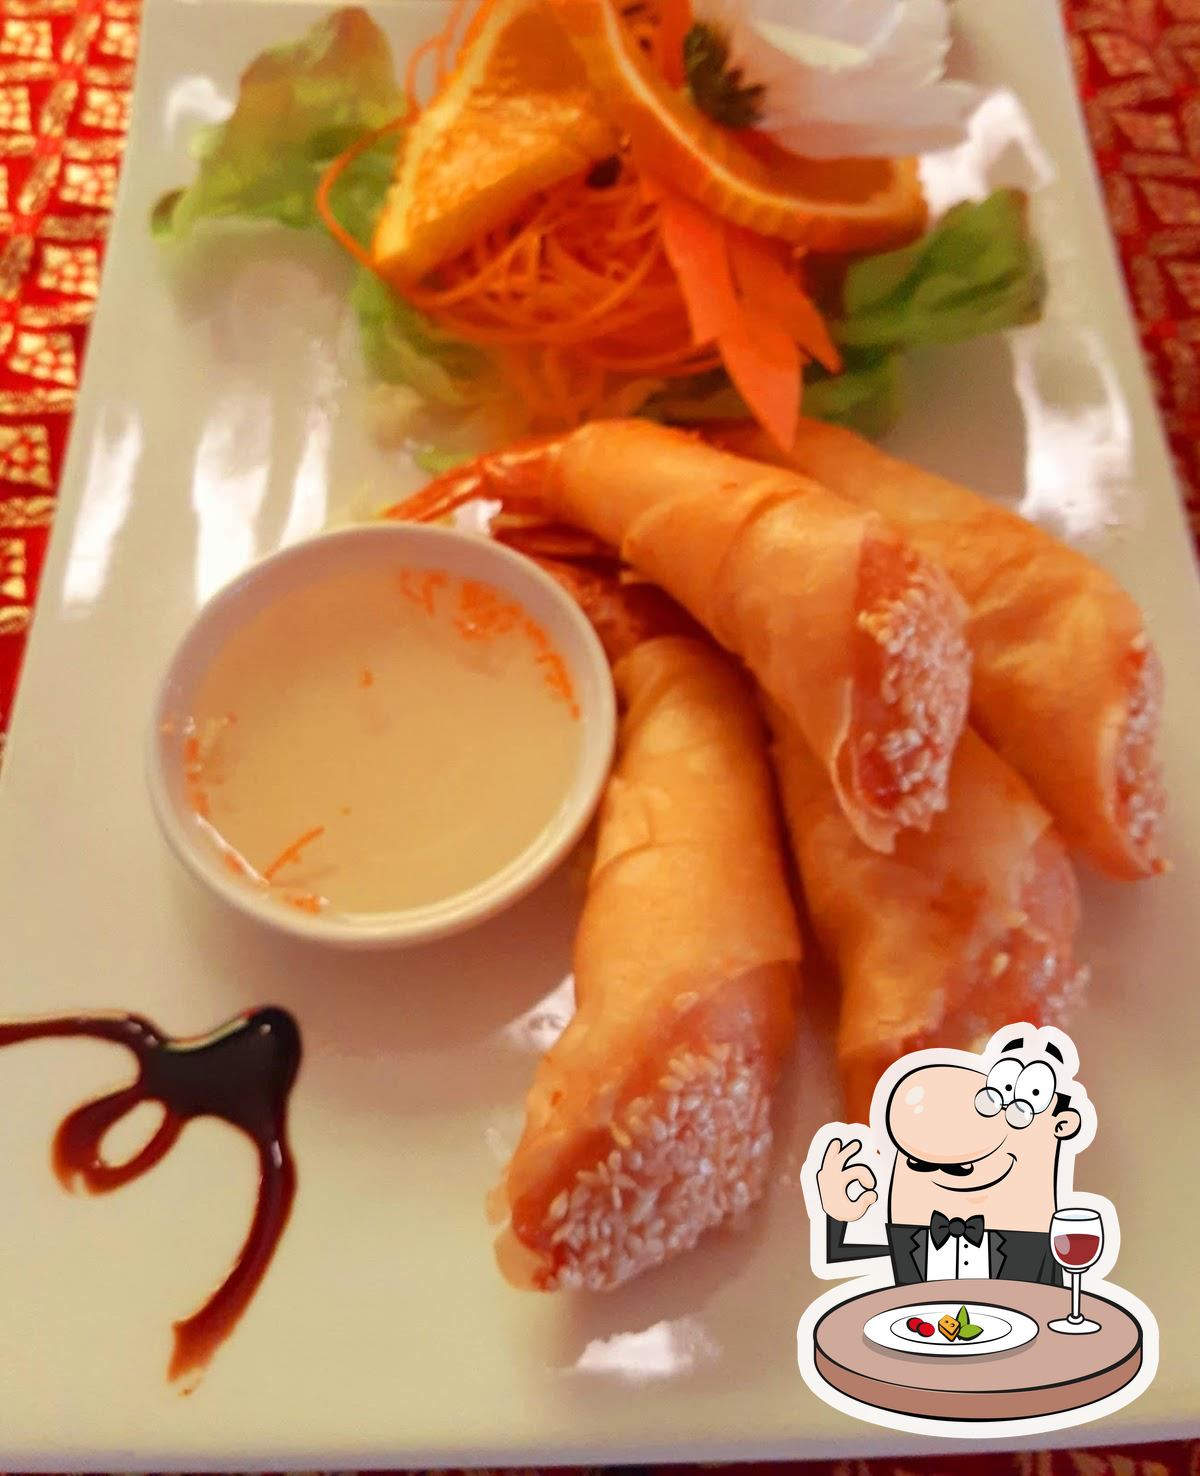 Thai Anan Restaurant By Arky In East Gosford Restaurant Menu And Reviews 3266